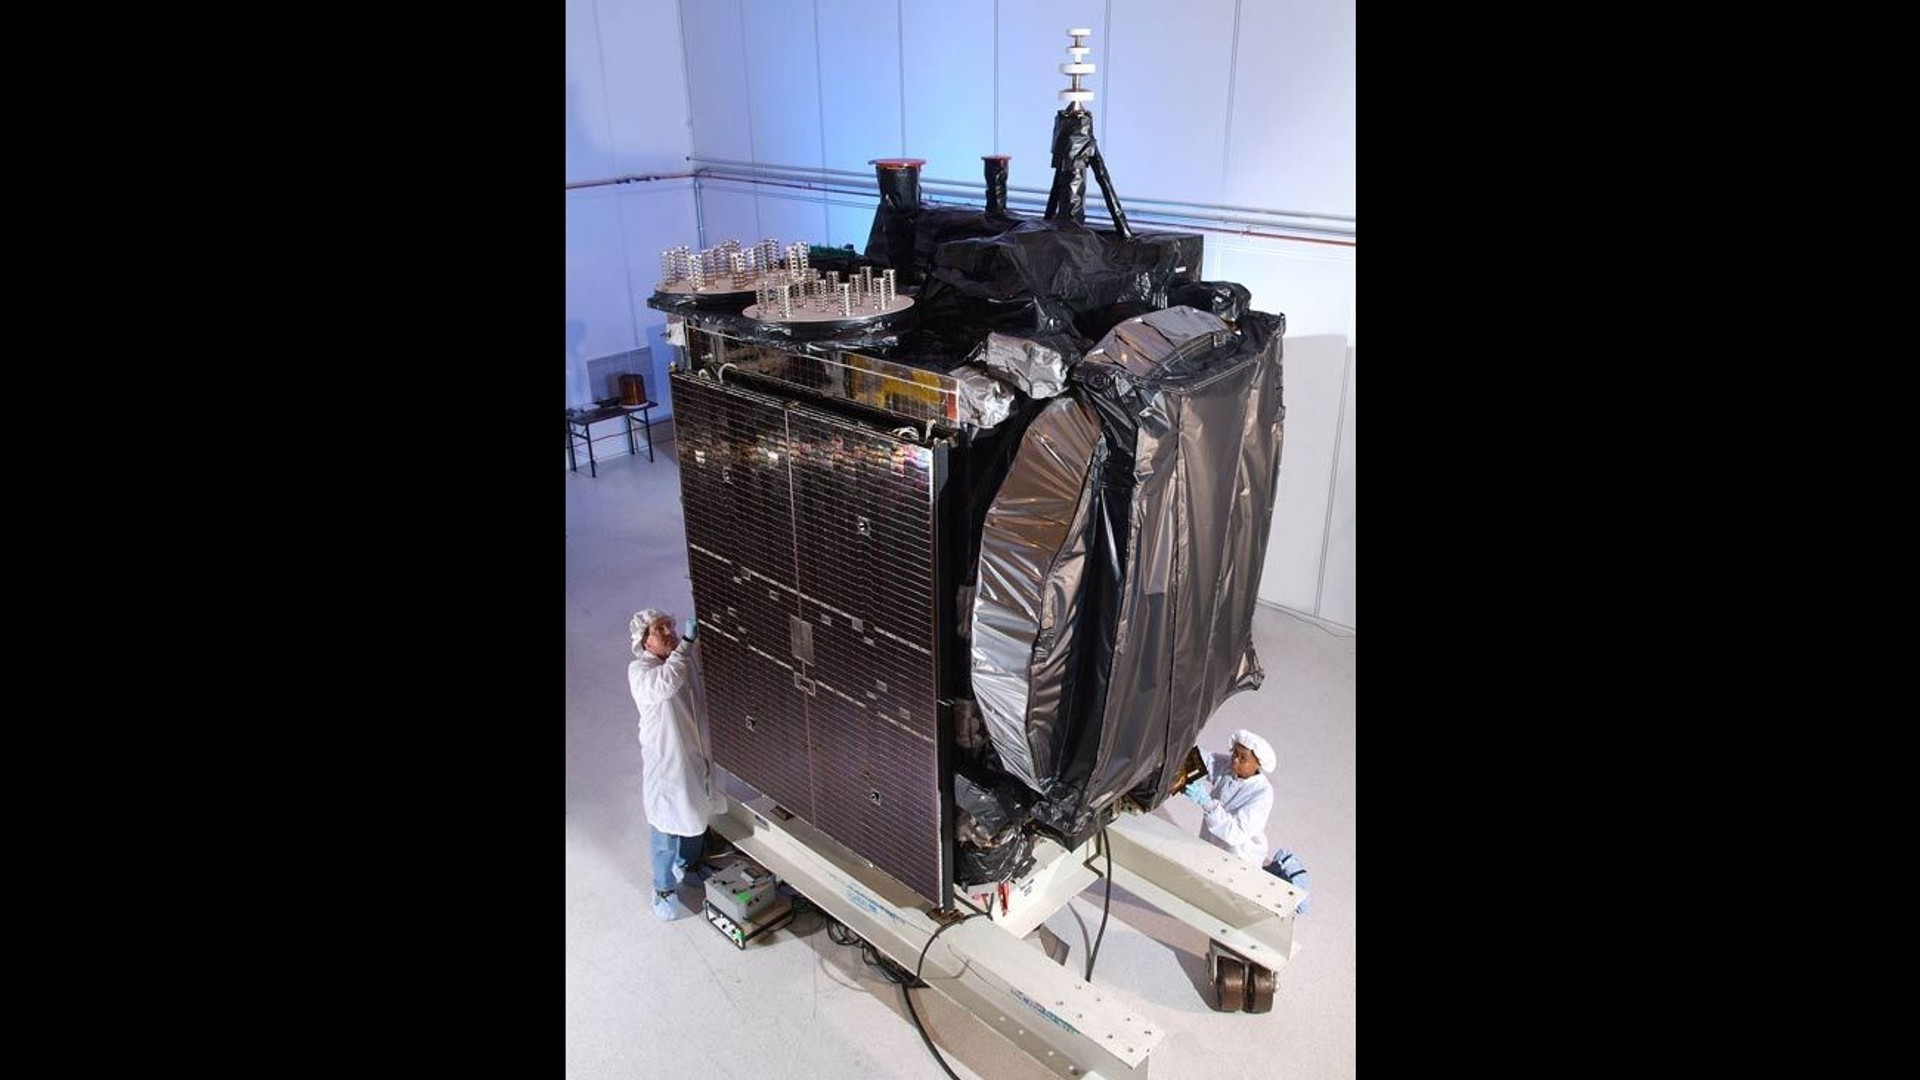 satellite sitting on cart with two technicians alongside in white suits